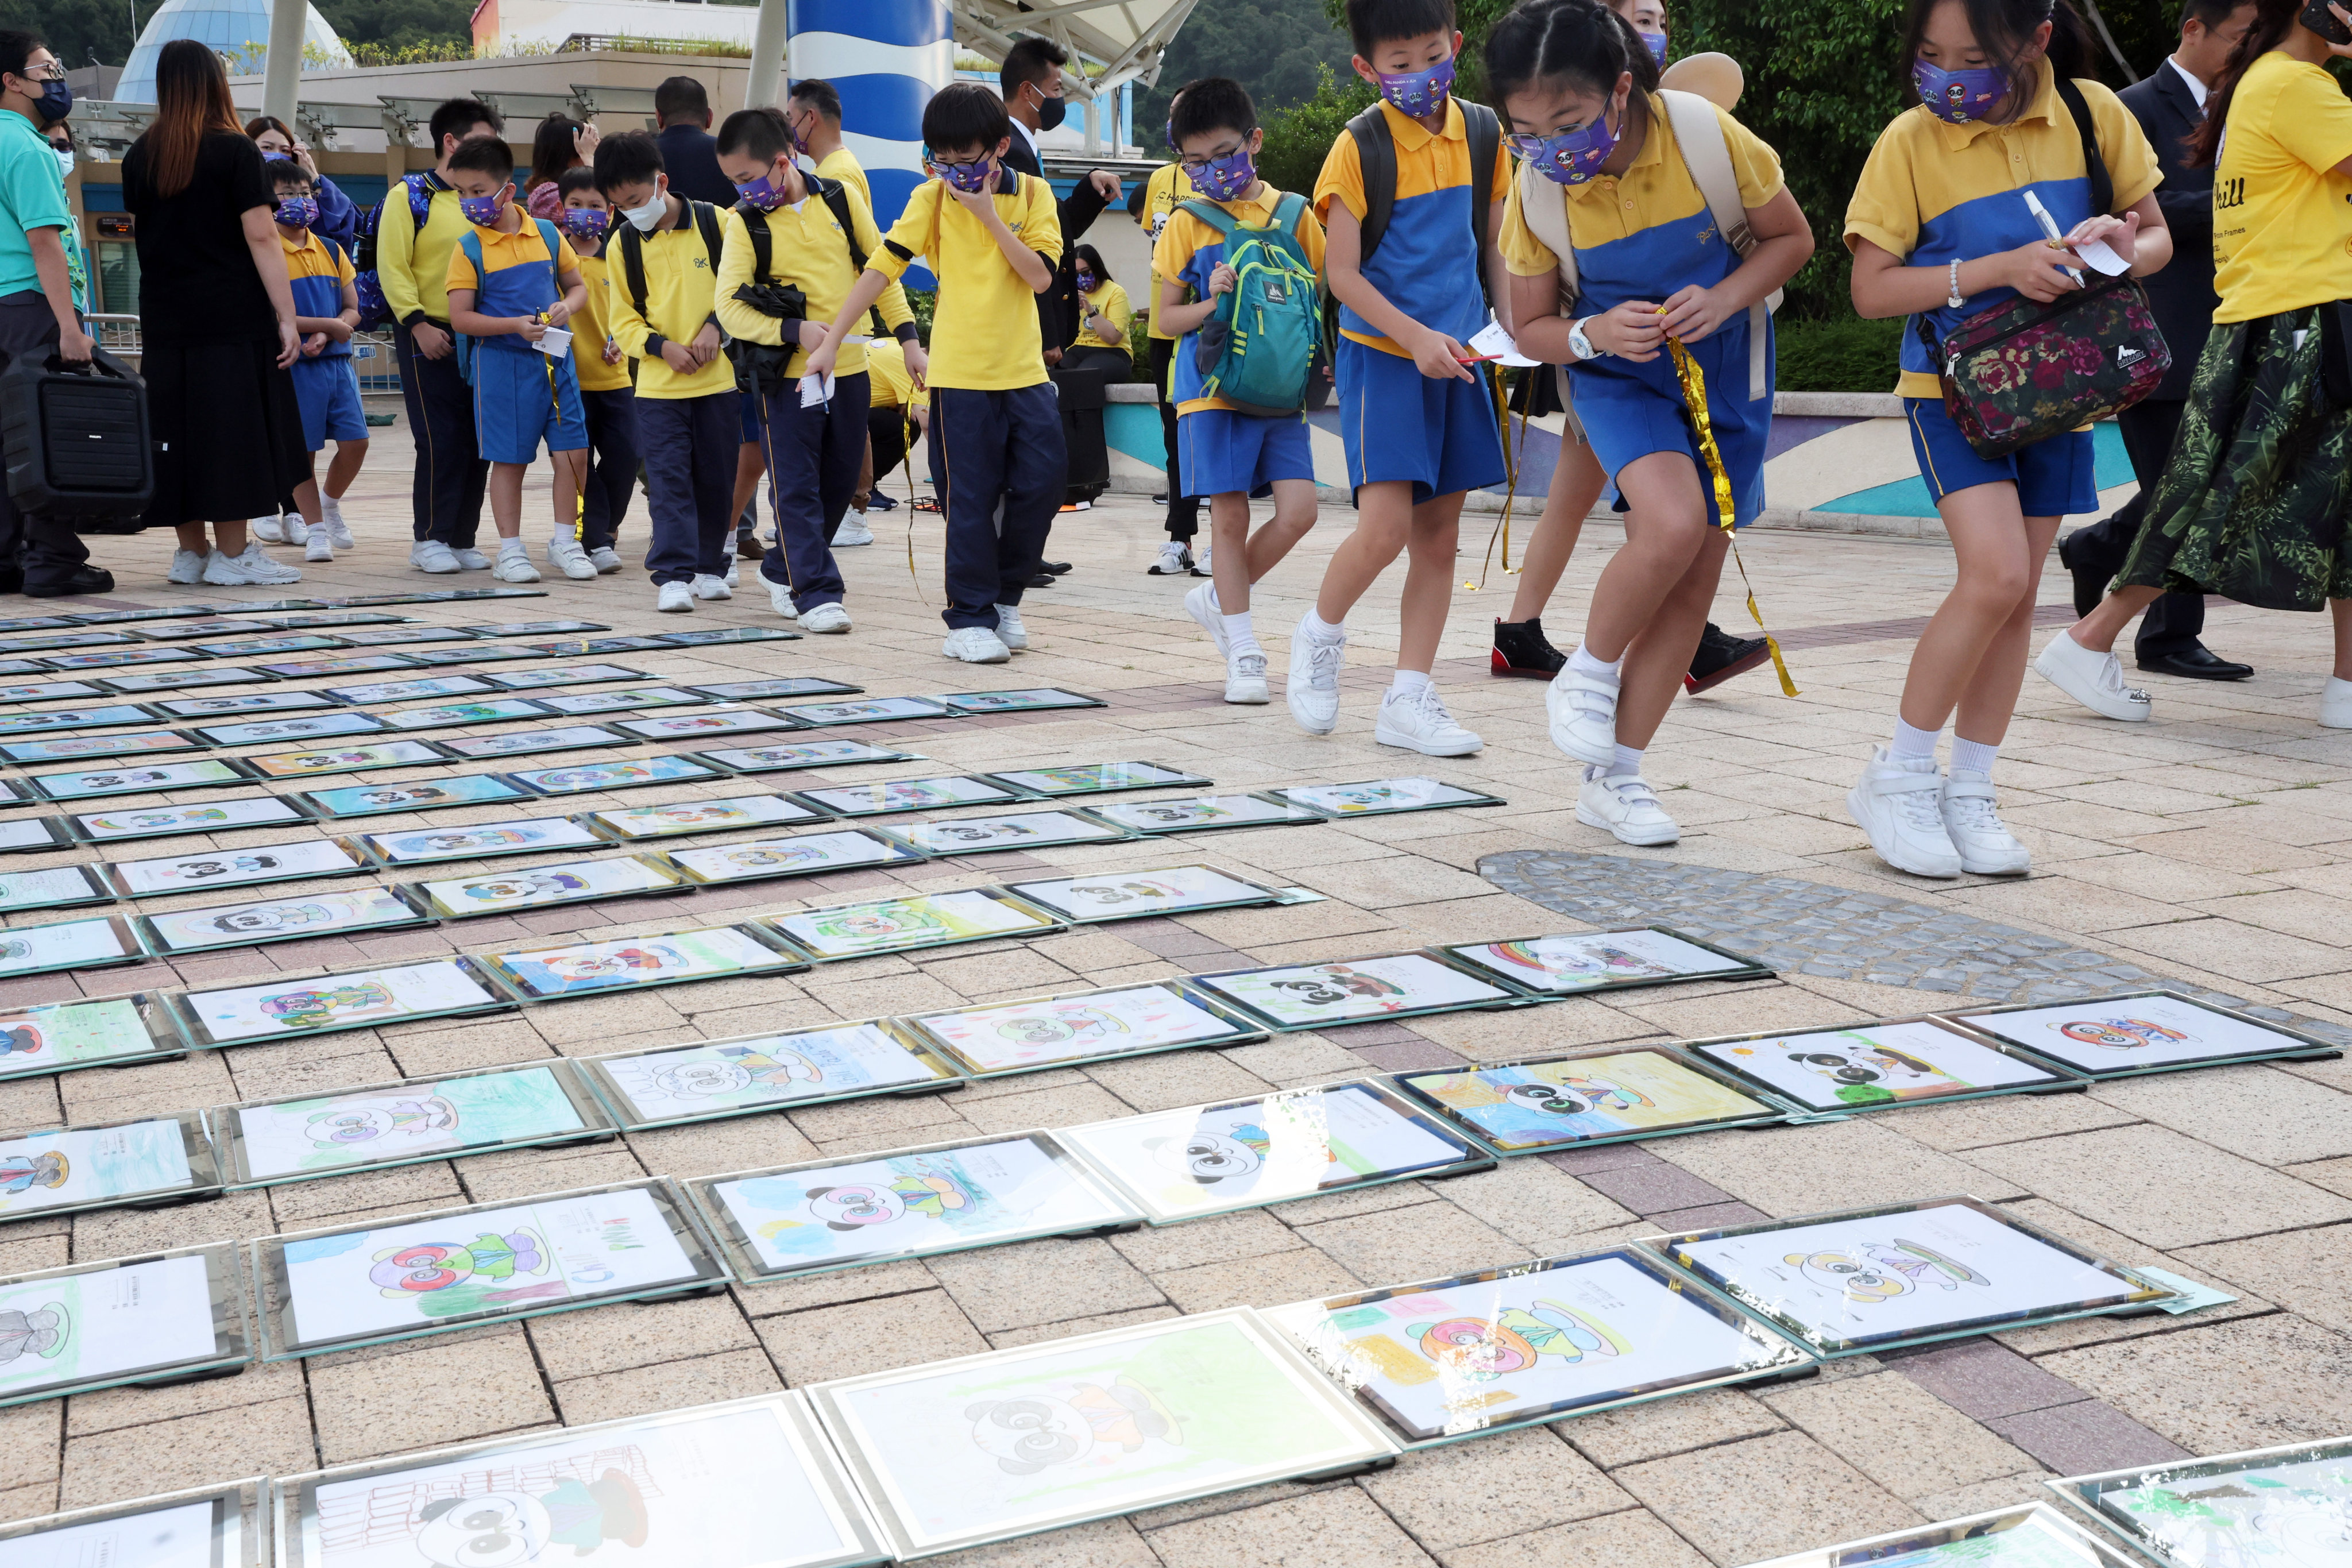 Children take part in setting a World Guinness record for the largest display of picture frames, in an event to raise mental health awareness, at Ocean Park on November 16. We need to have earlier conversations about mental health with both students and parents to destigmatise the taboo of mental disorders. Photo: Edmond So